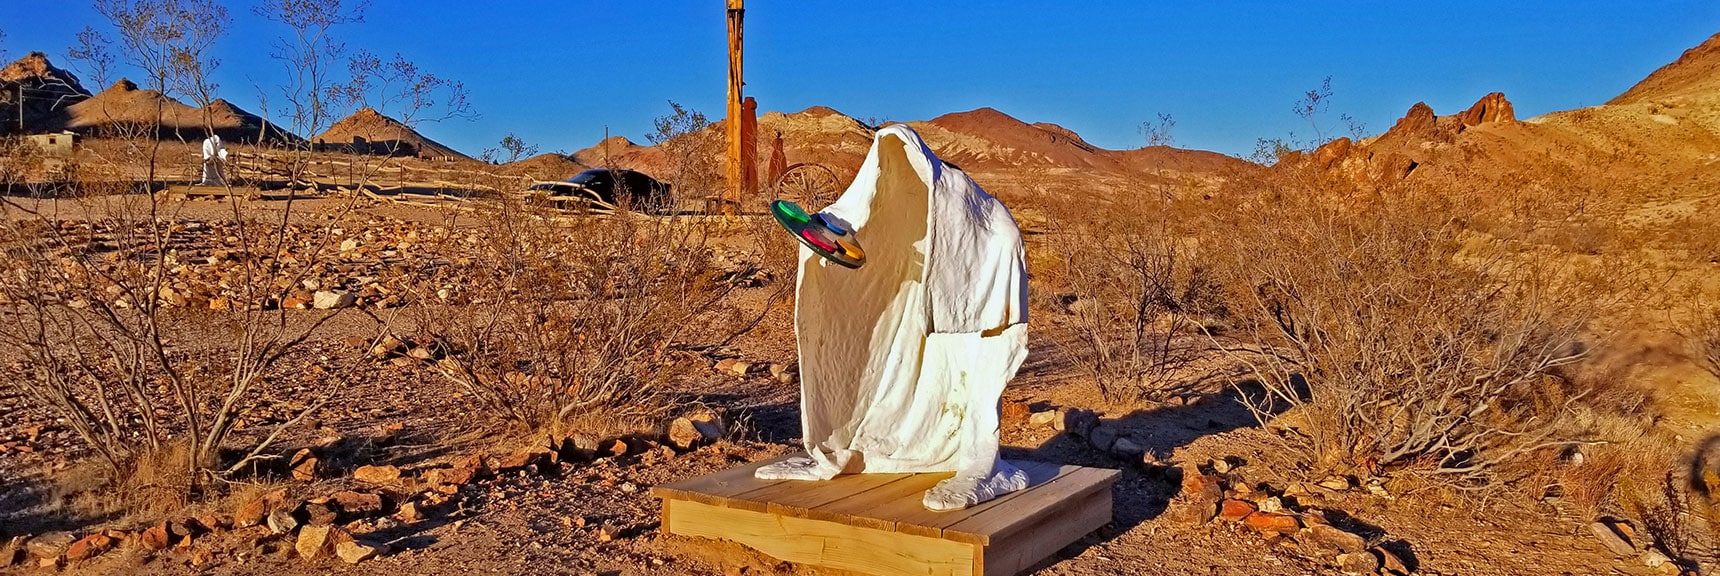 "Serving Ghost" Art Piece at Goldwell Open Air Museum | Rhyolite Ghost Town | Death Valley Area, Nevada